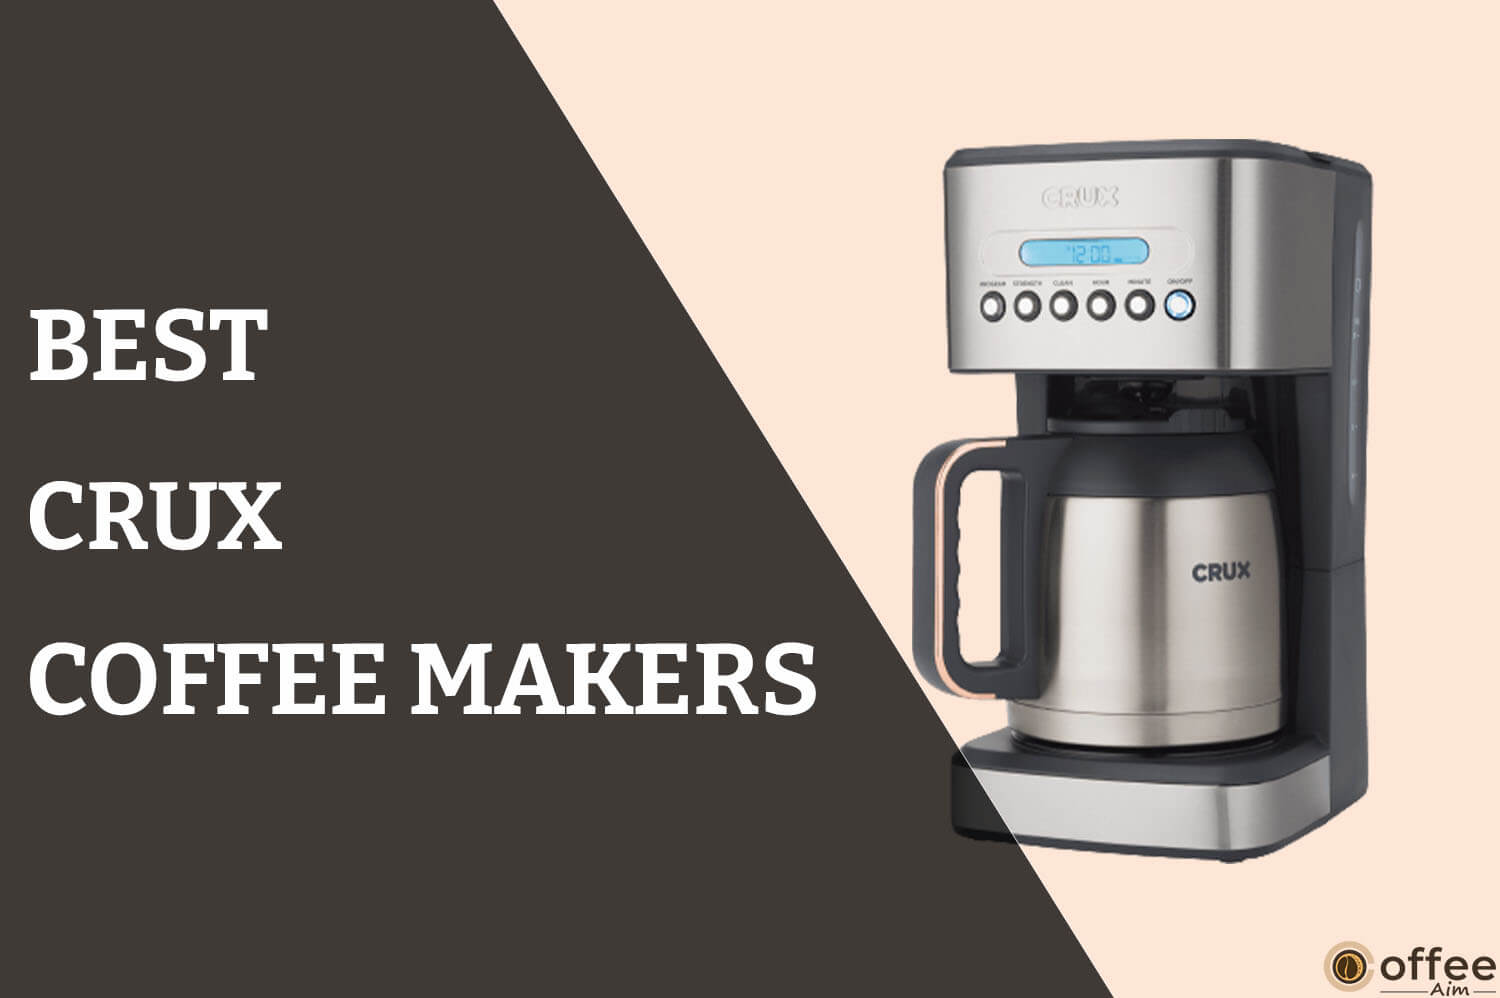 Feature image for the article "Best Crux Coffee Makers"